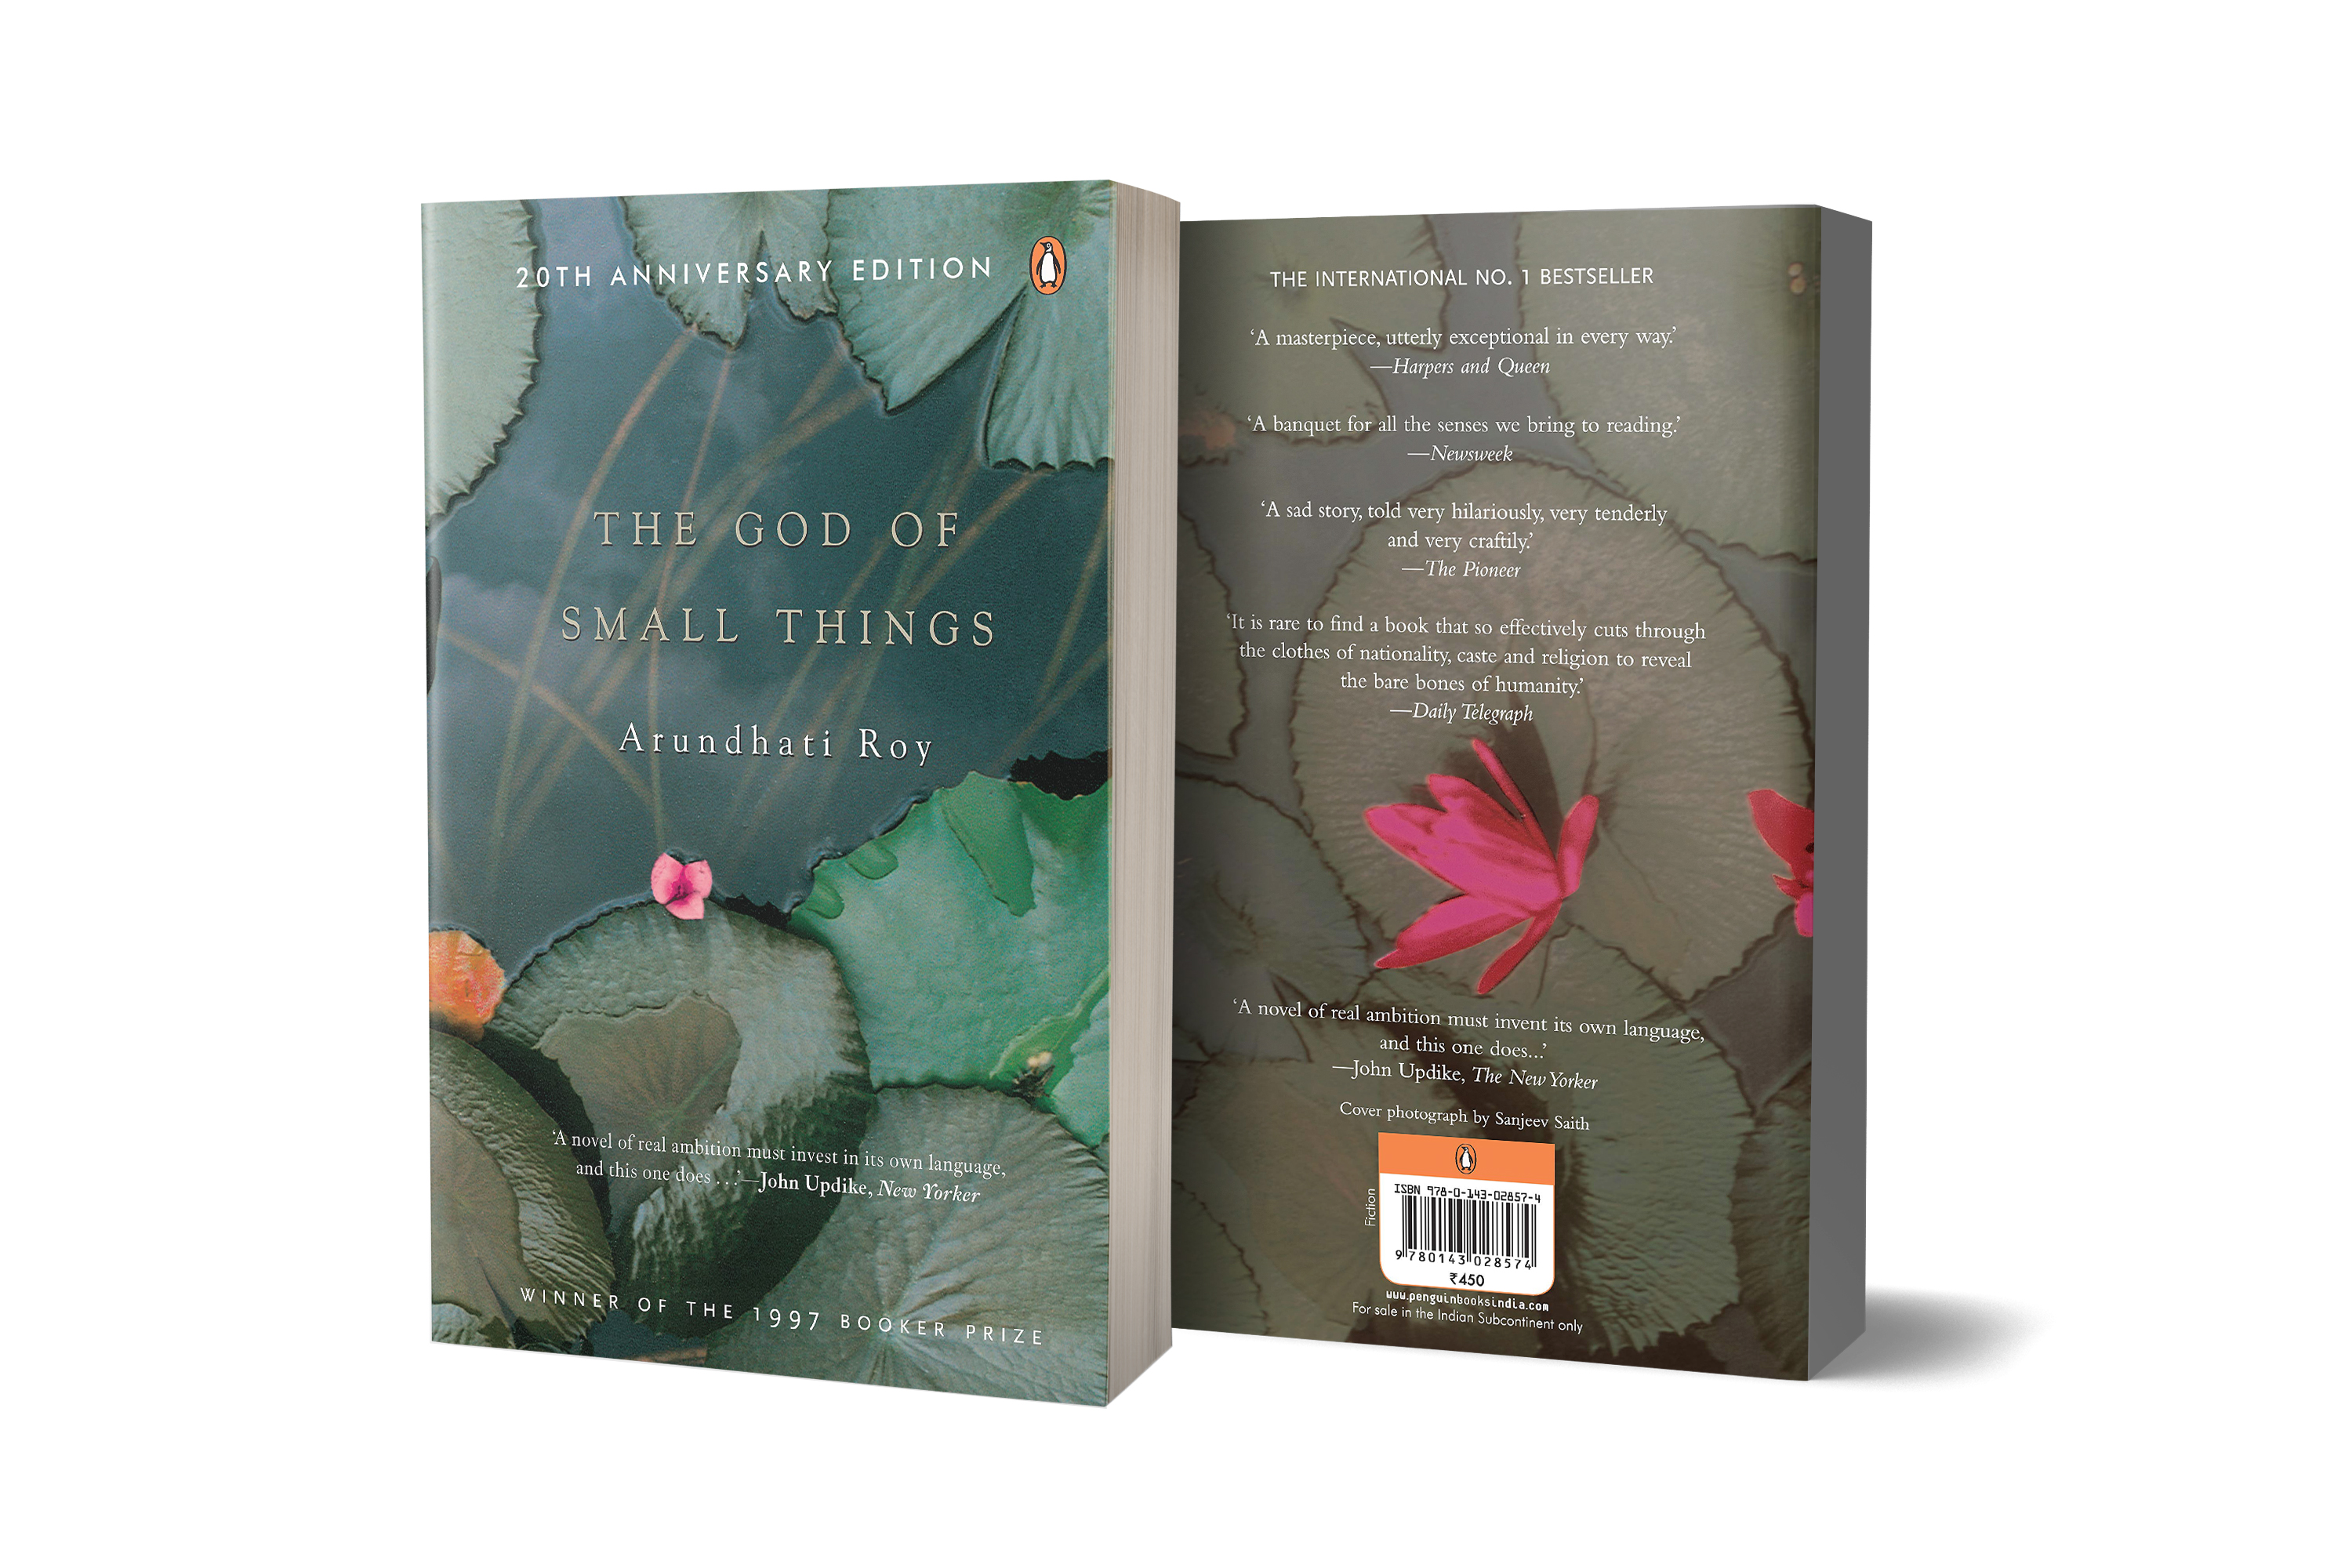 The front and back cover of "God of Small Things", displaying endorsements and reviews.